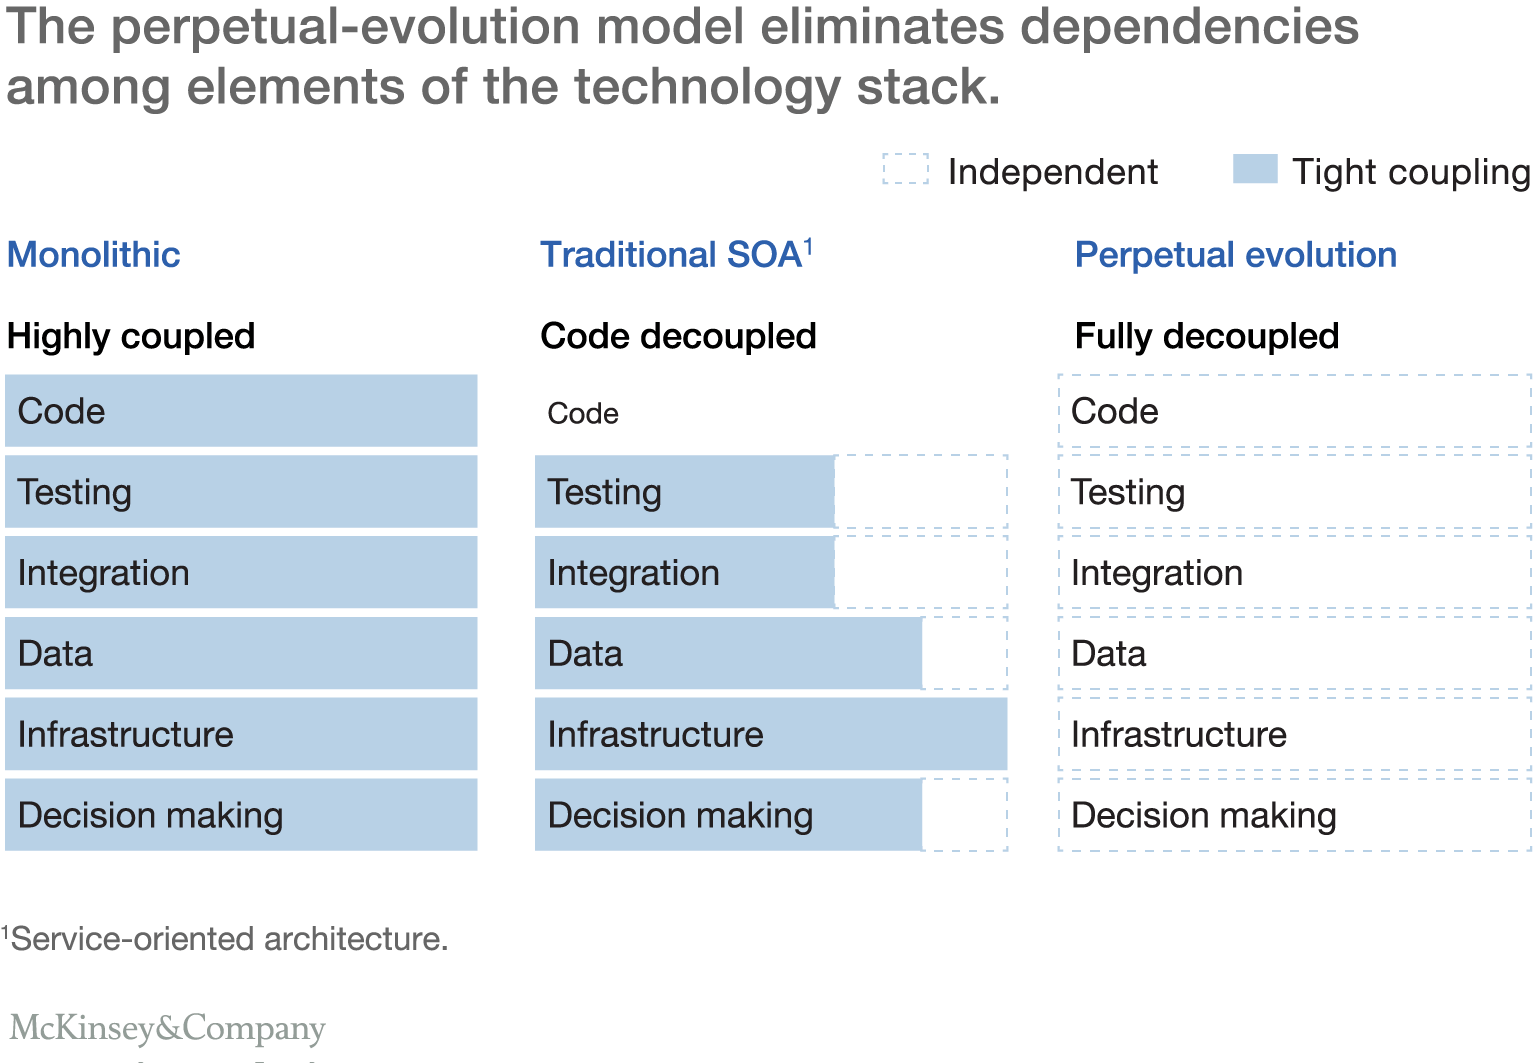 The perpetual-evolution model eliminates dependencies among elements of the technology stack.